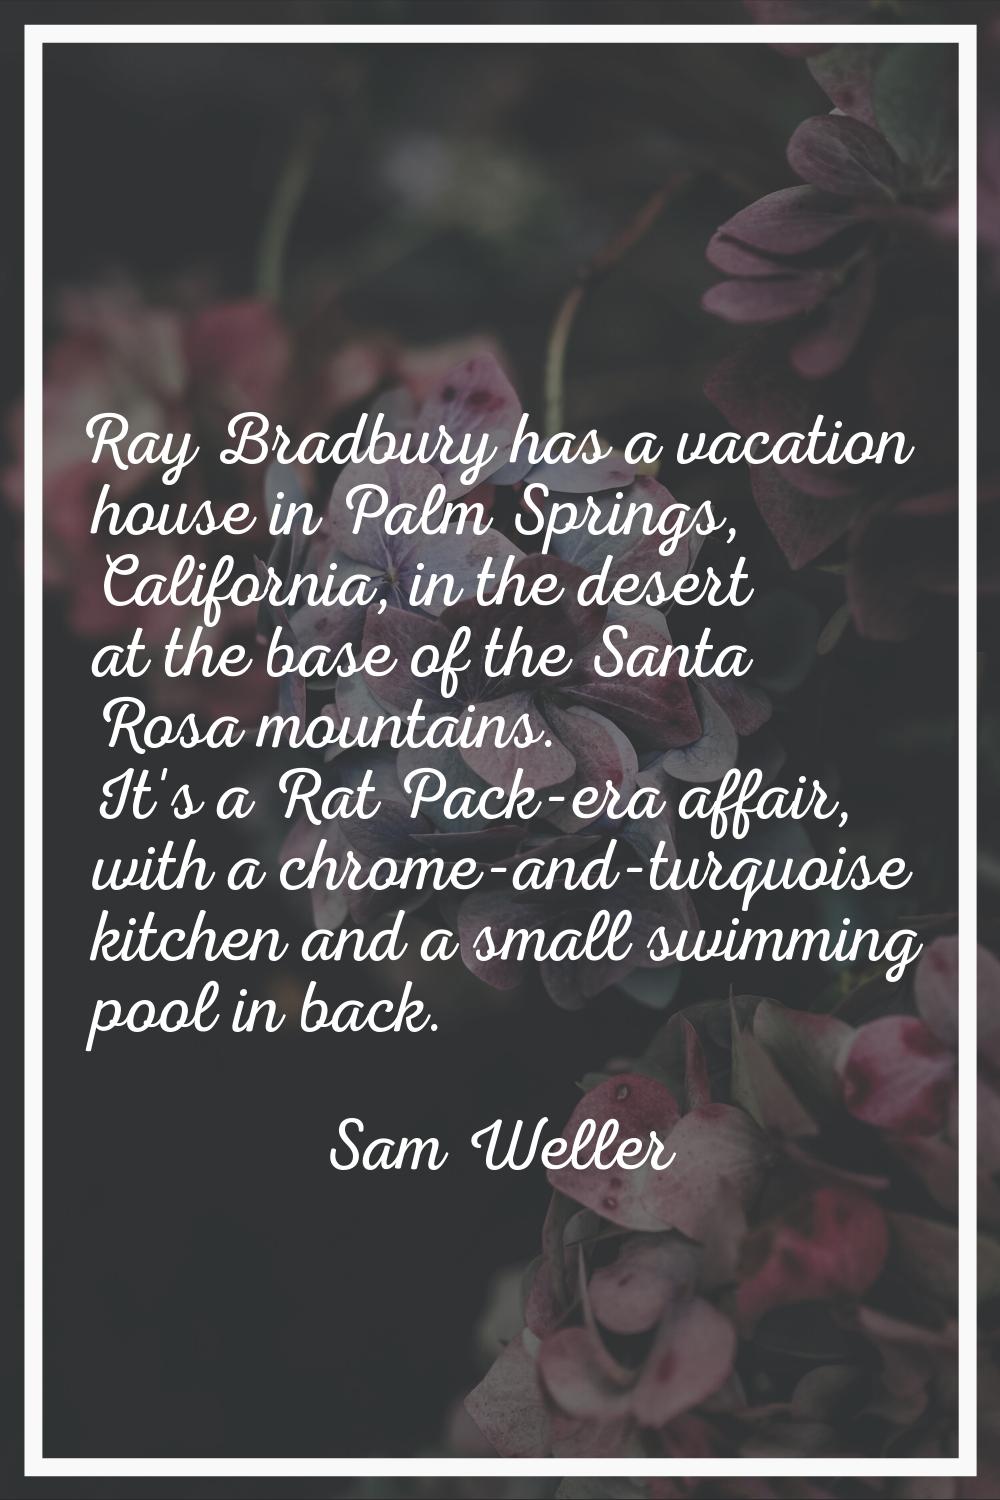 Ray Bradbury has a vacation house in Palm Springs, California, in the desert at the base of the San